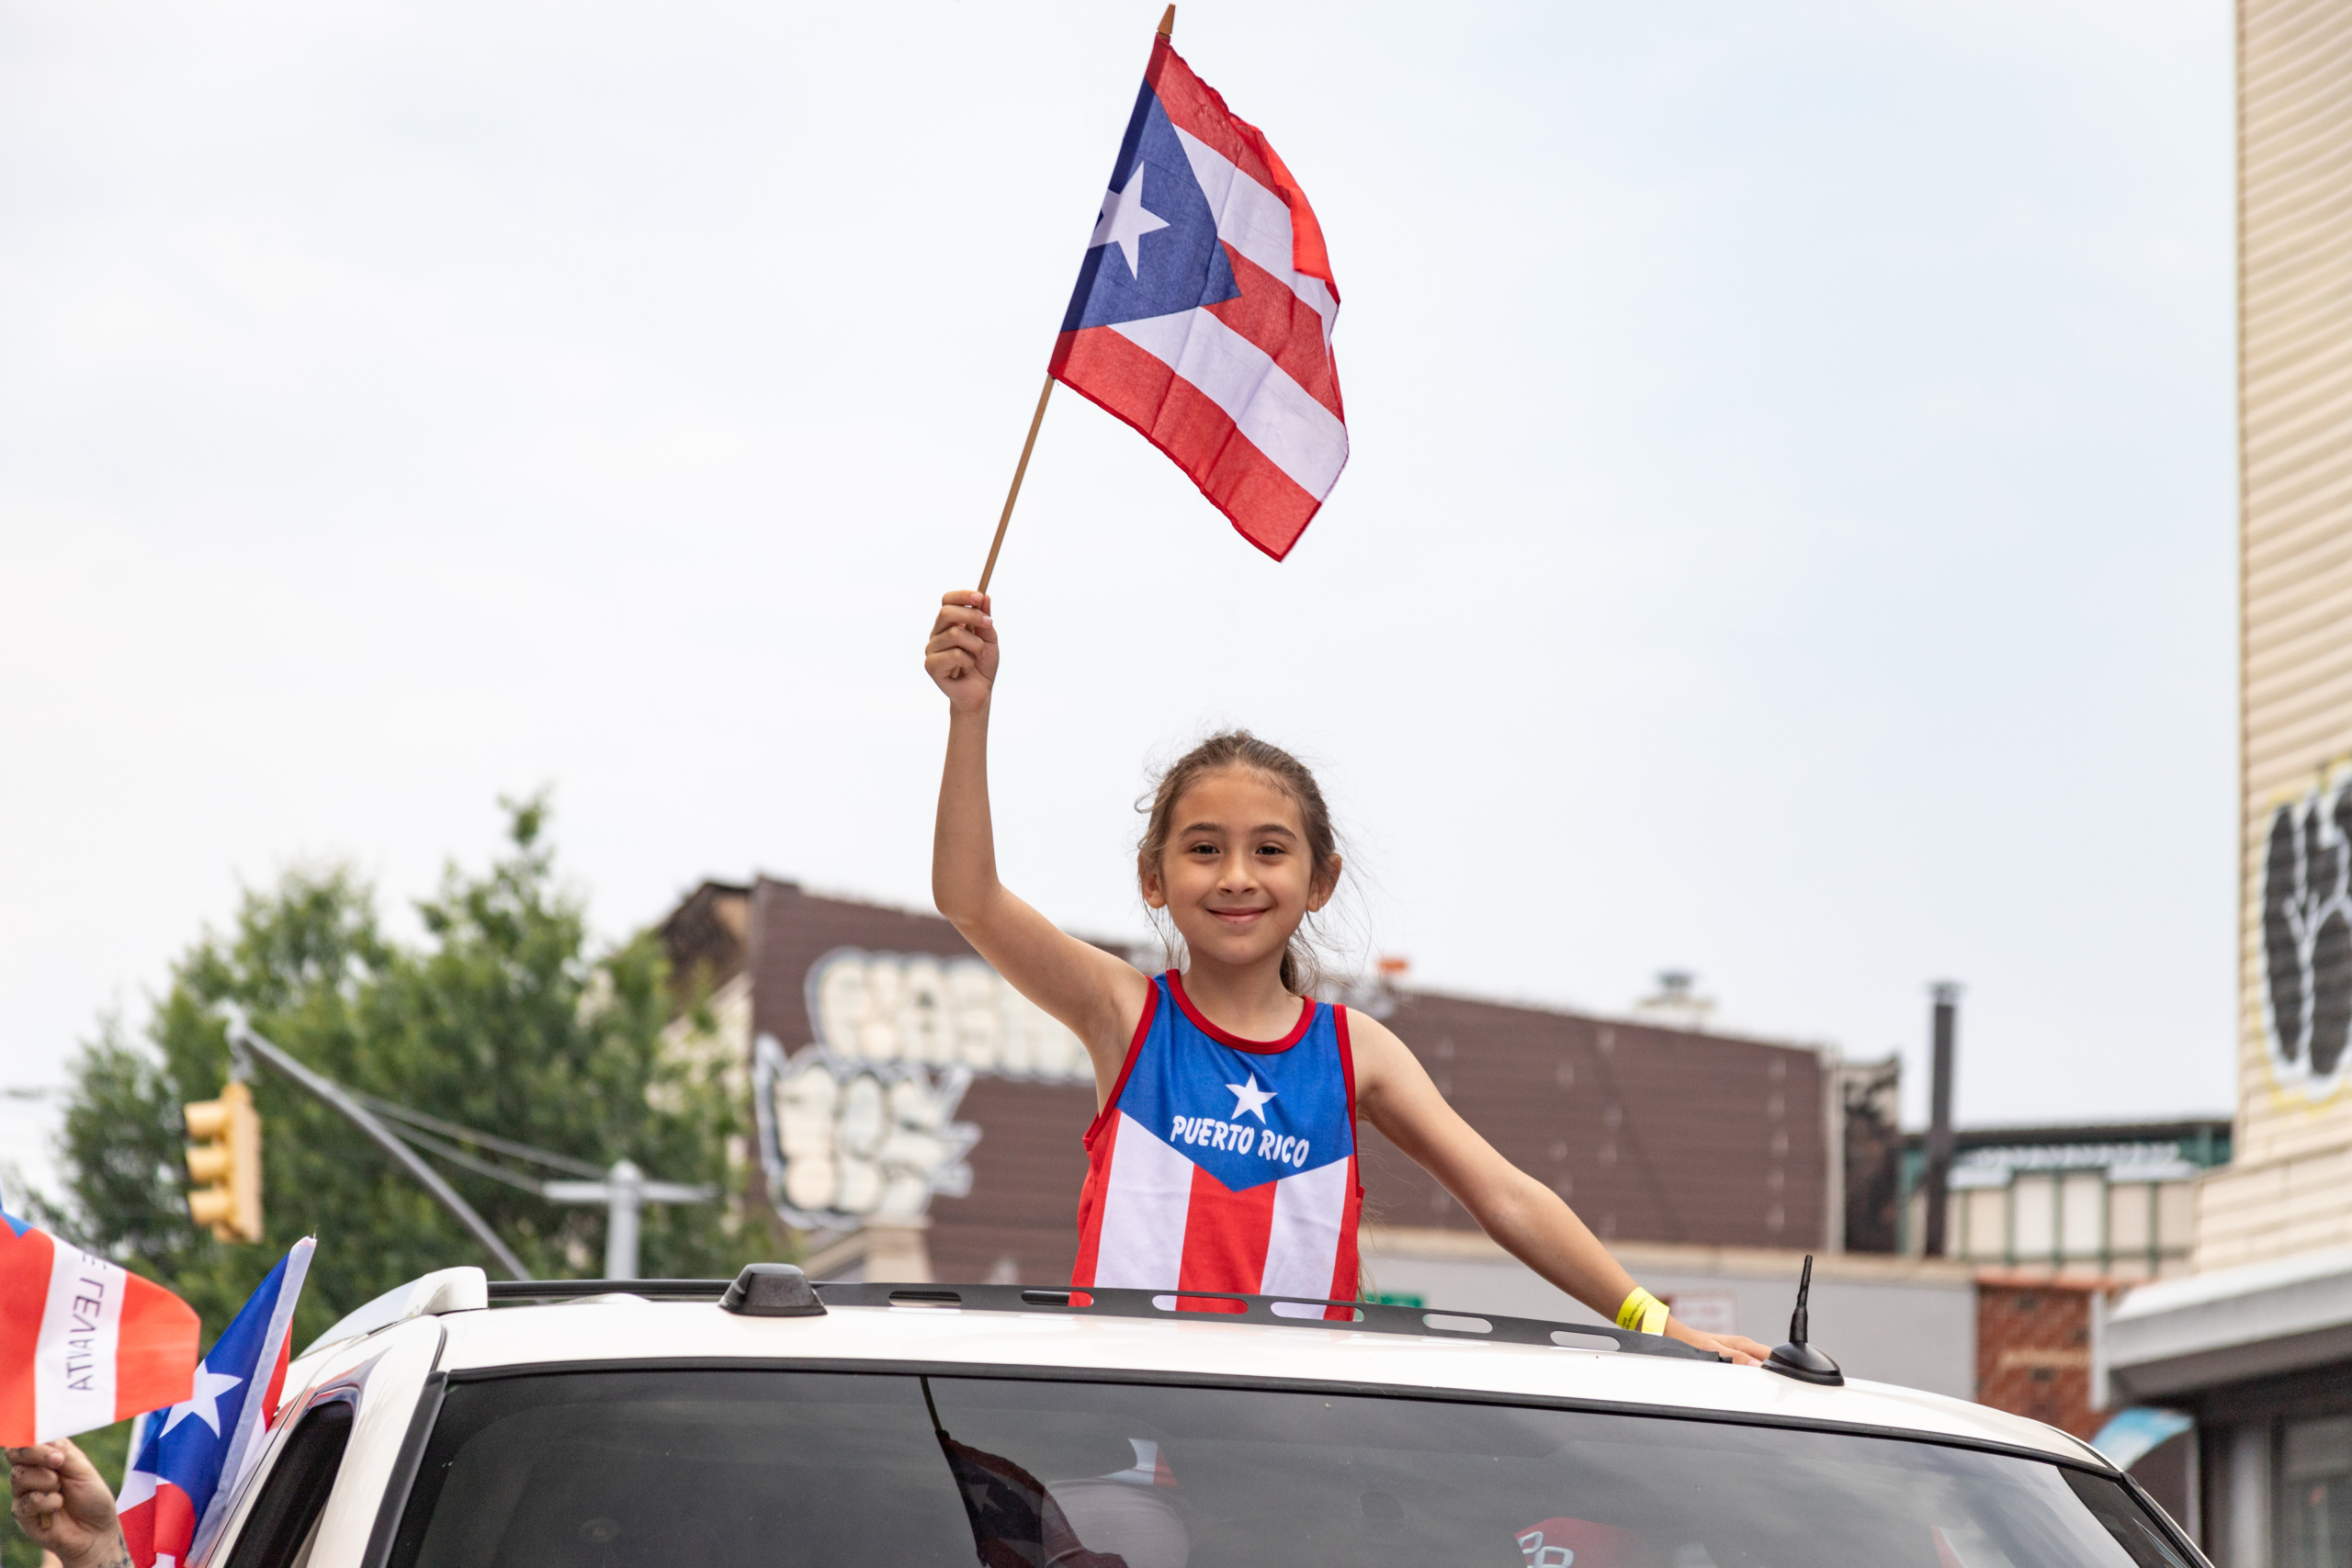 We Were Puerto Rican Day Parade Floatin’